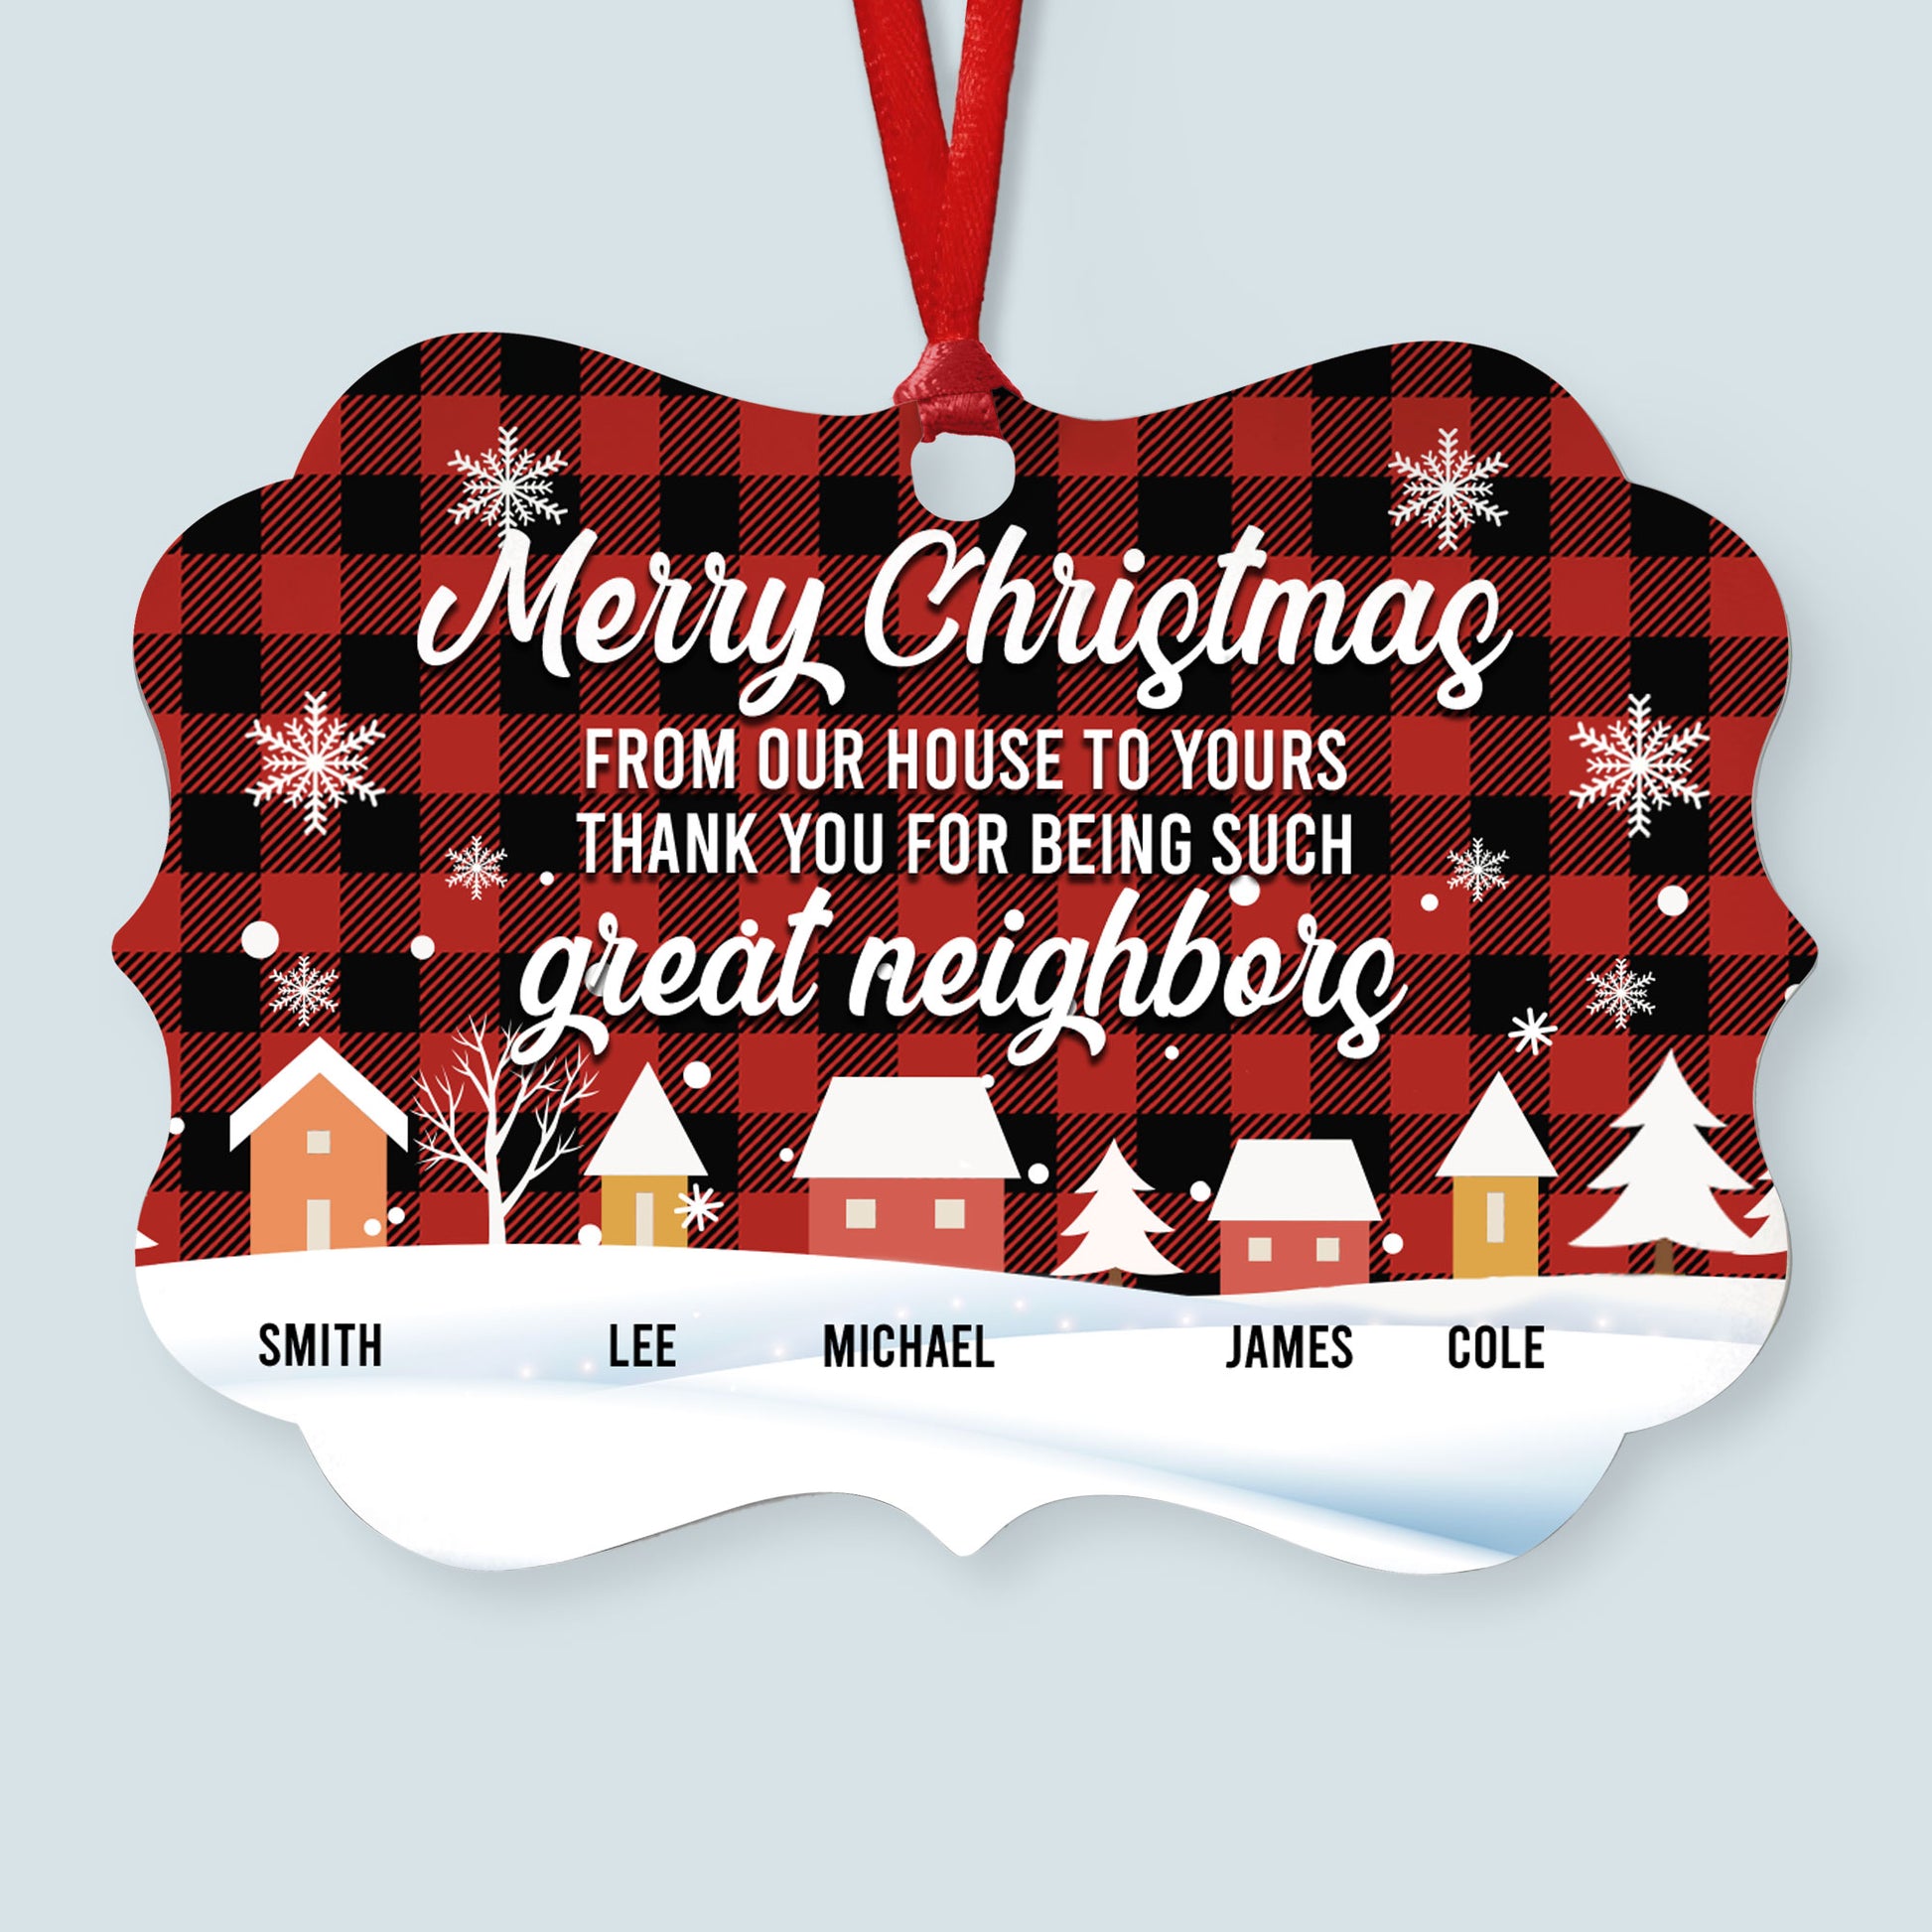 Meaningful Christmas Gifts for Friends, Neighbors and Teachers